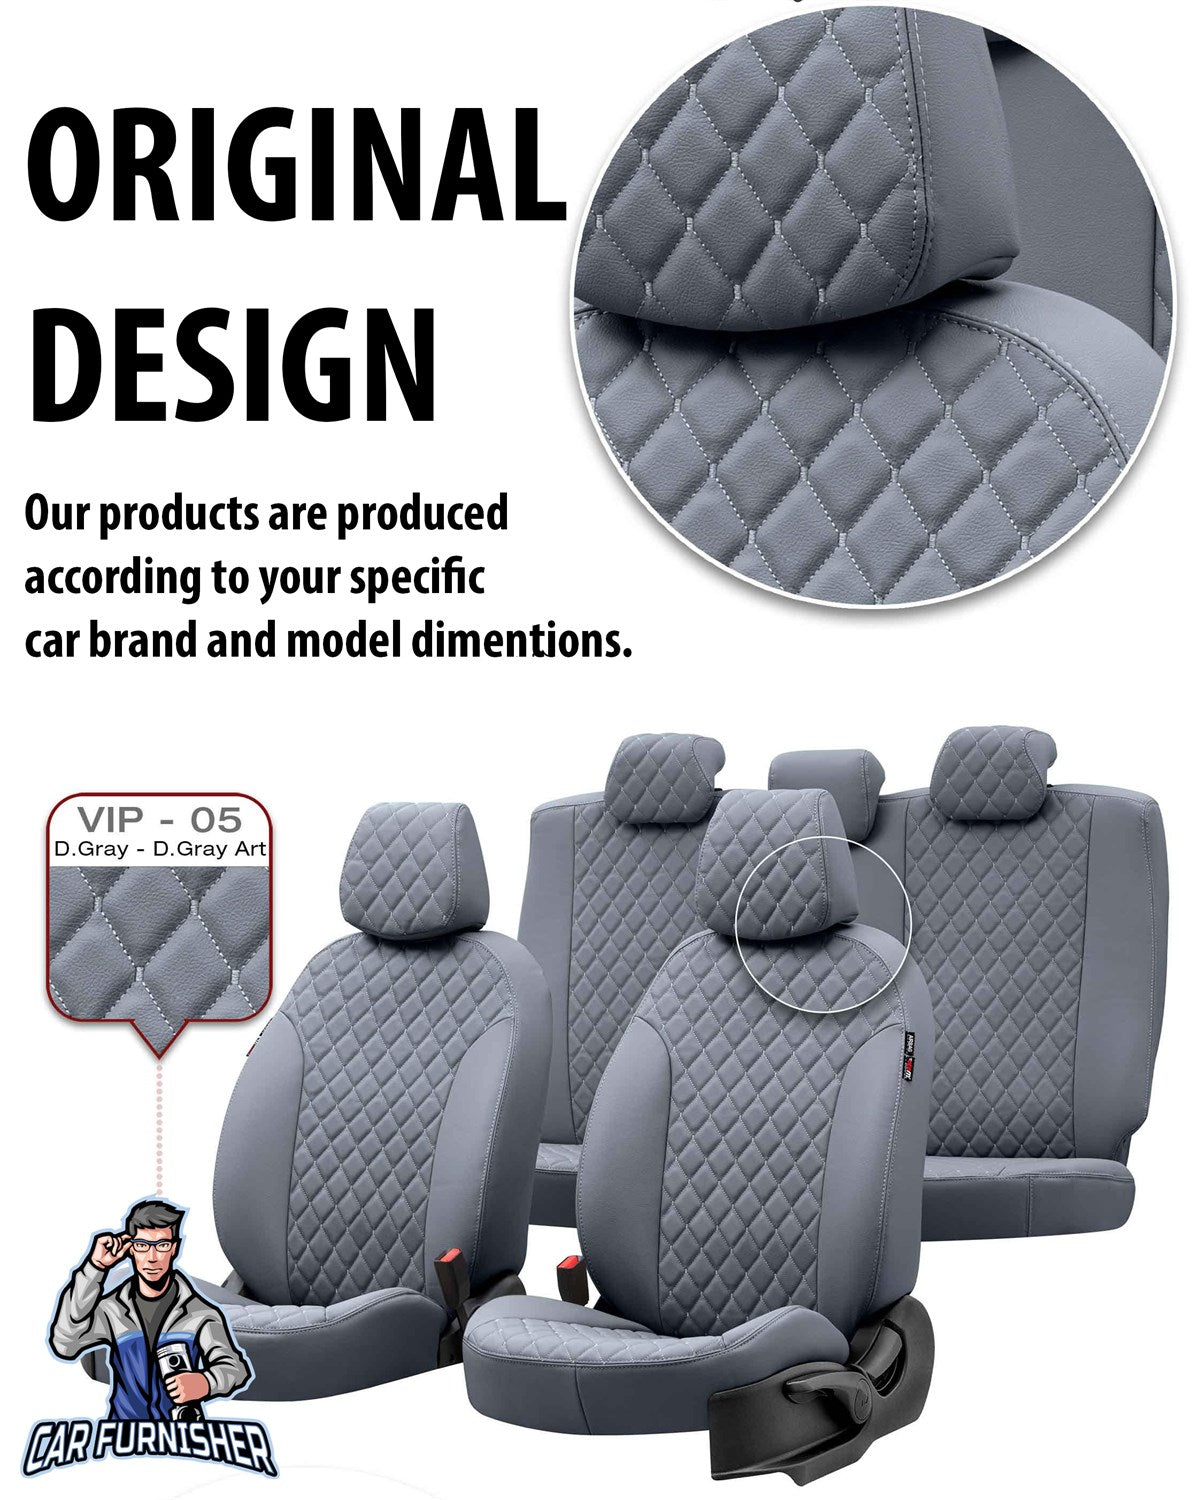 Volkswagen Golf Seat Cover Madrid Leather Design Smoked Leather